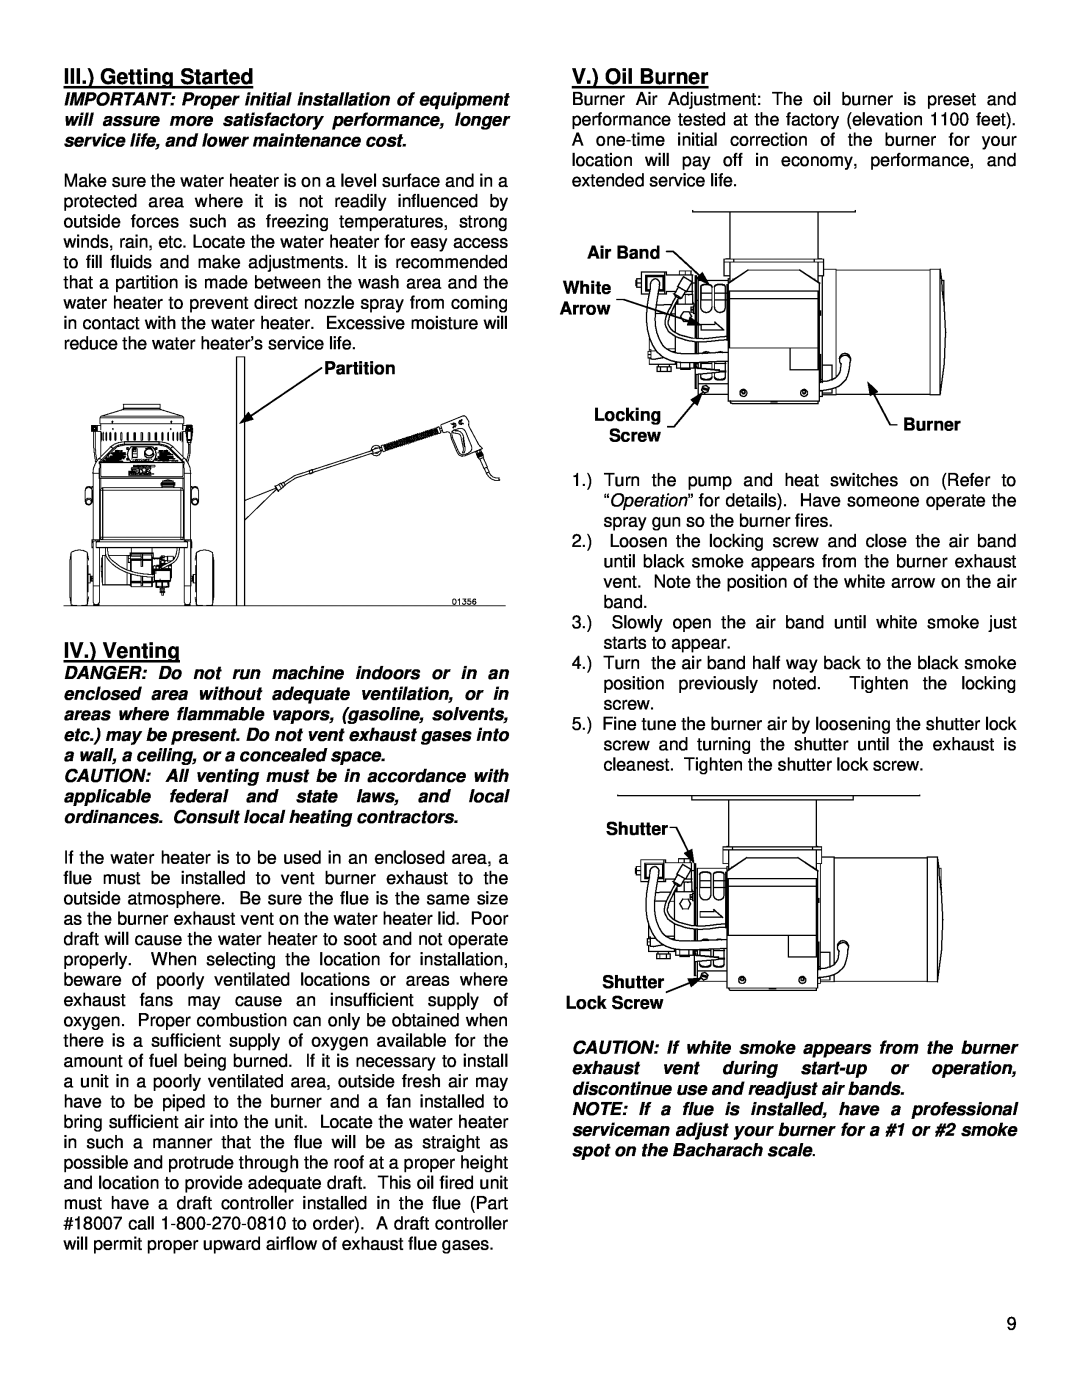 Northern Industrial Tools 157494 III. Getting Started, IV. Venting, V. Oil Burner, Partition, Air Band White Arrow, Screw 